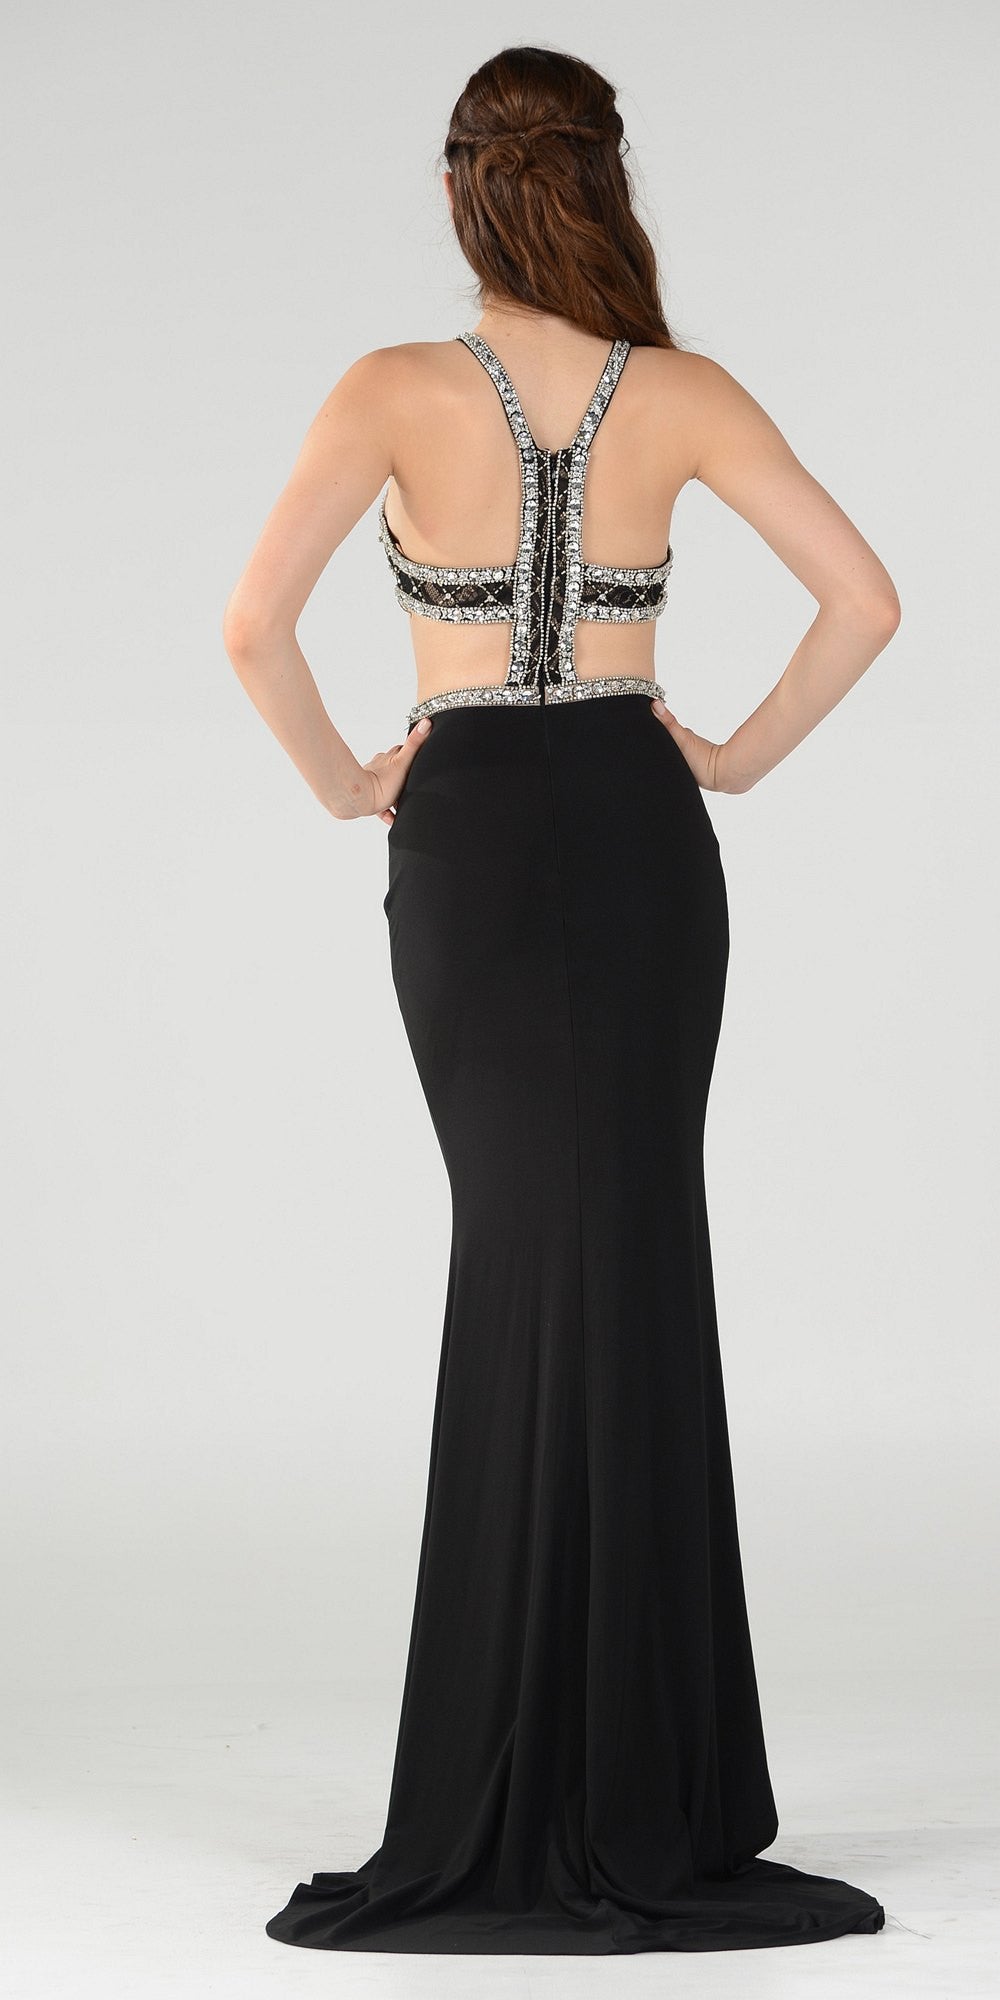 Long Sexy Prom Dress with Cut-Out Bodice Open Back and Train Black